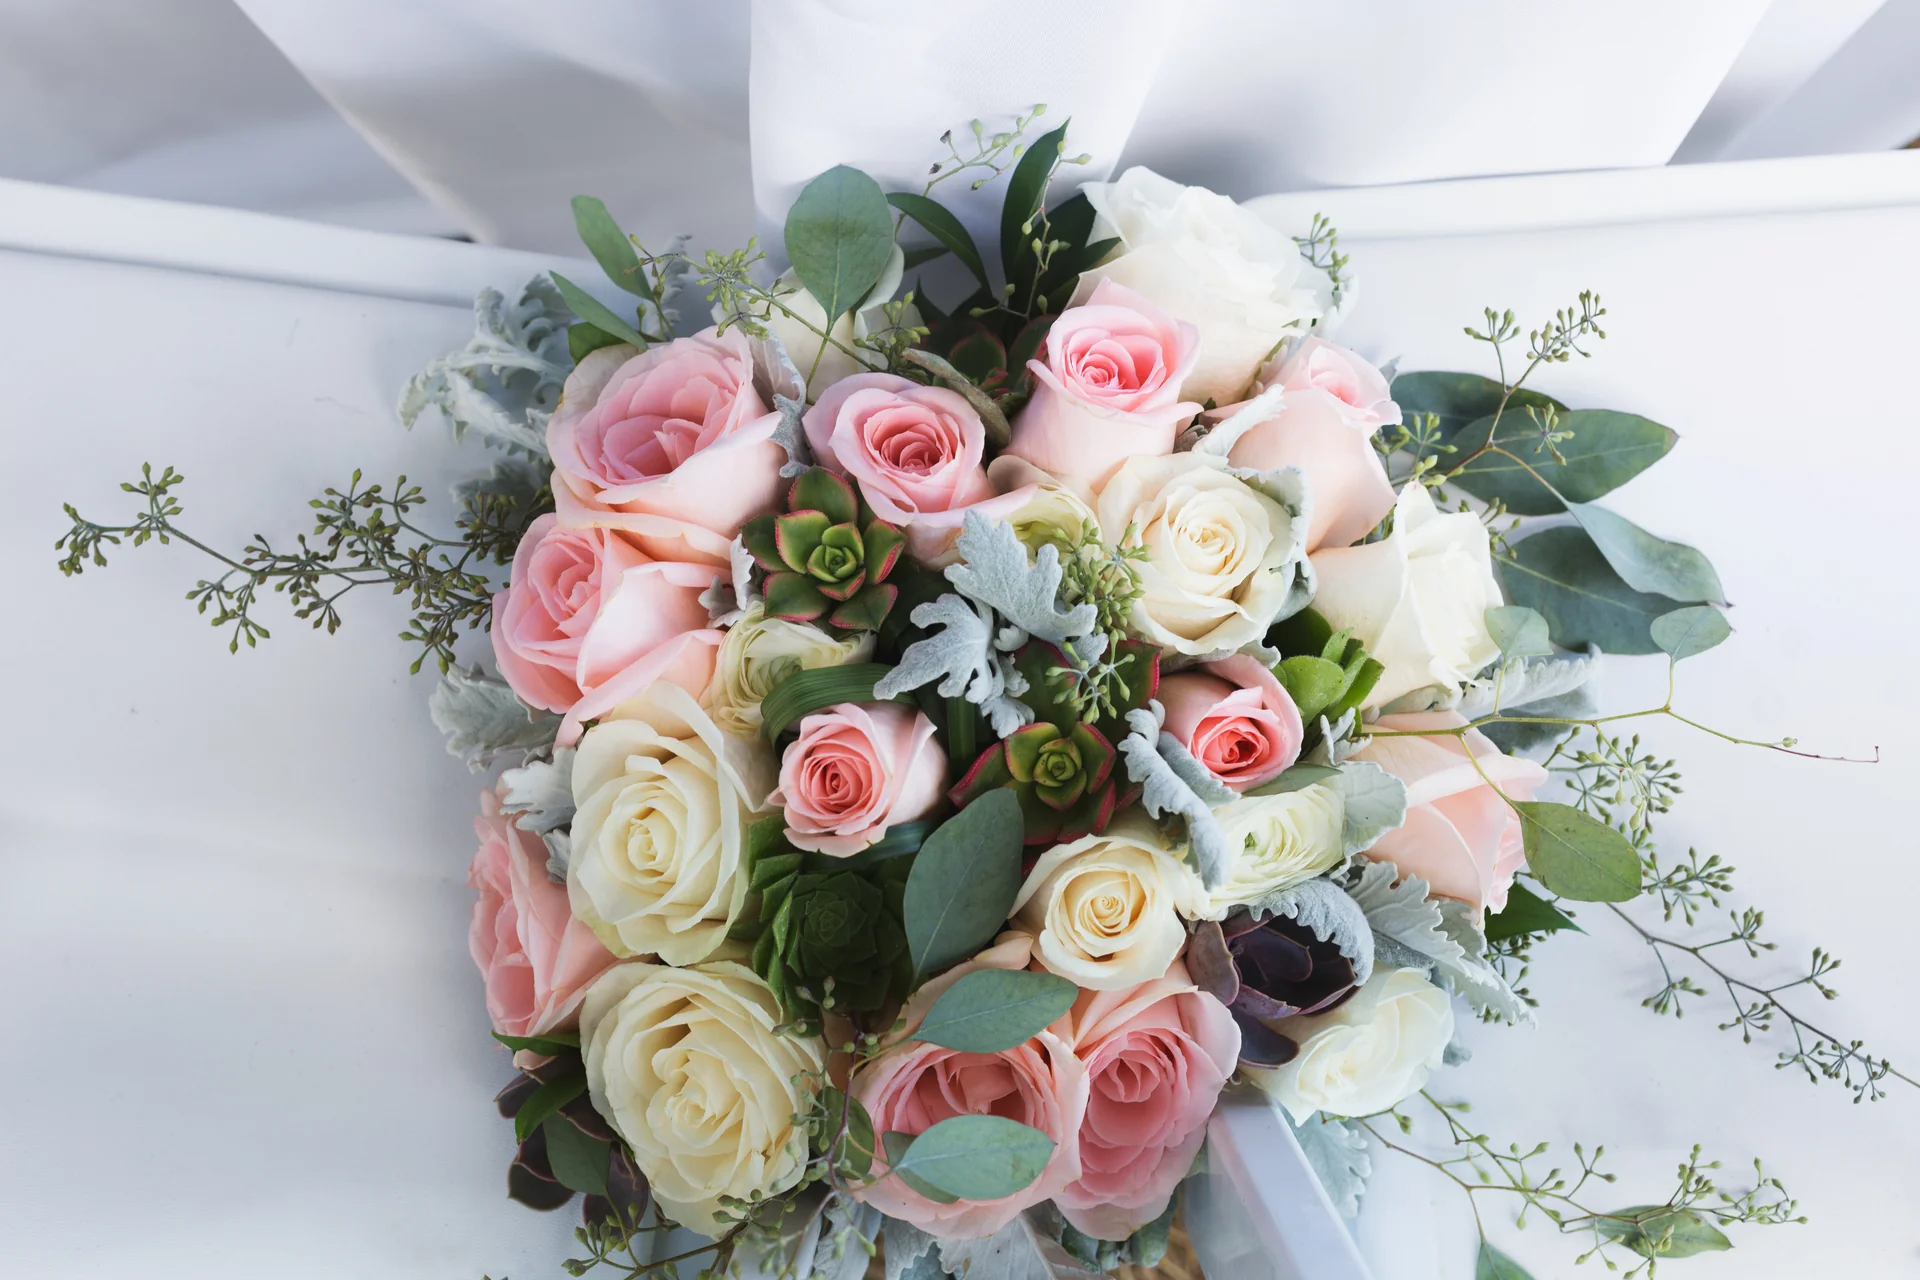 Top Rated Sydney Flower Delivery Services: What Sets Them Apart?